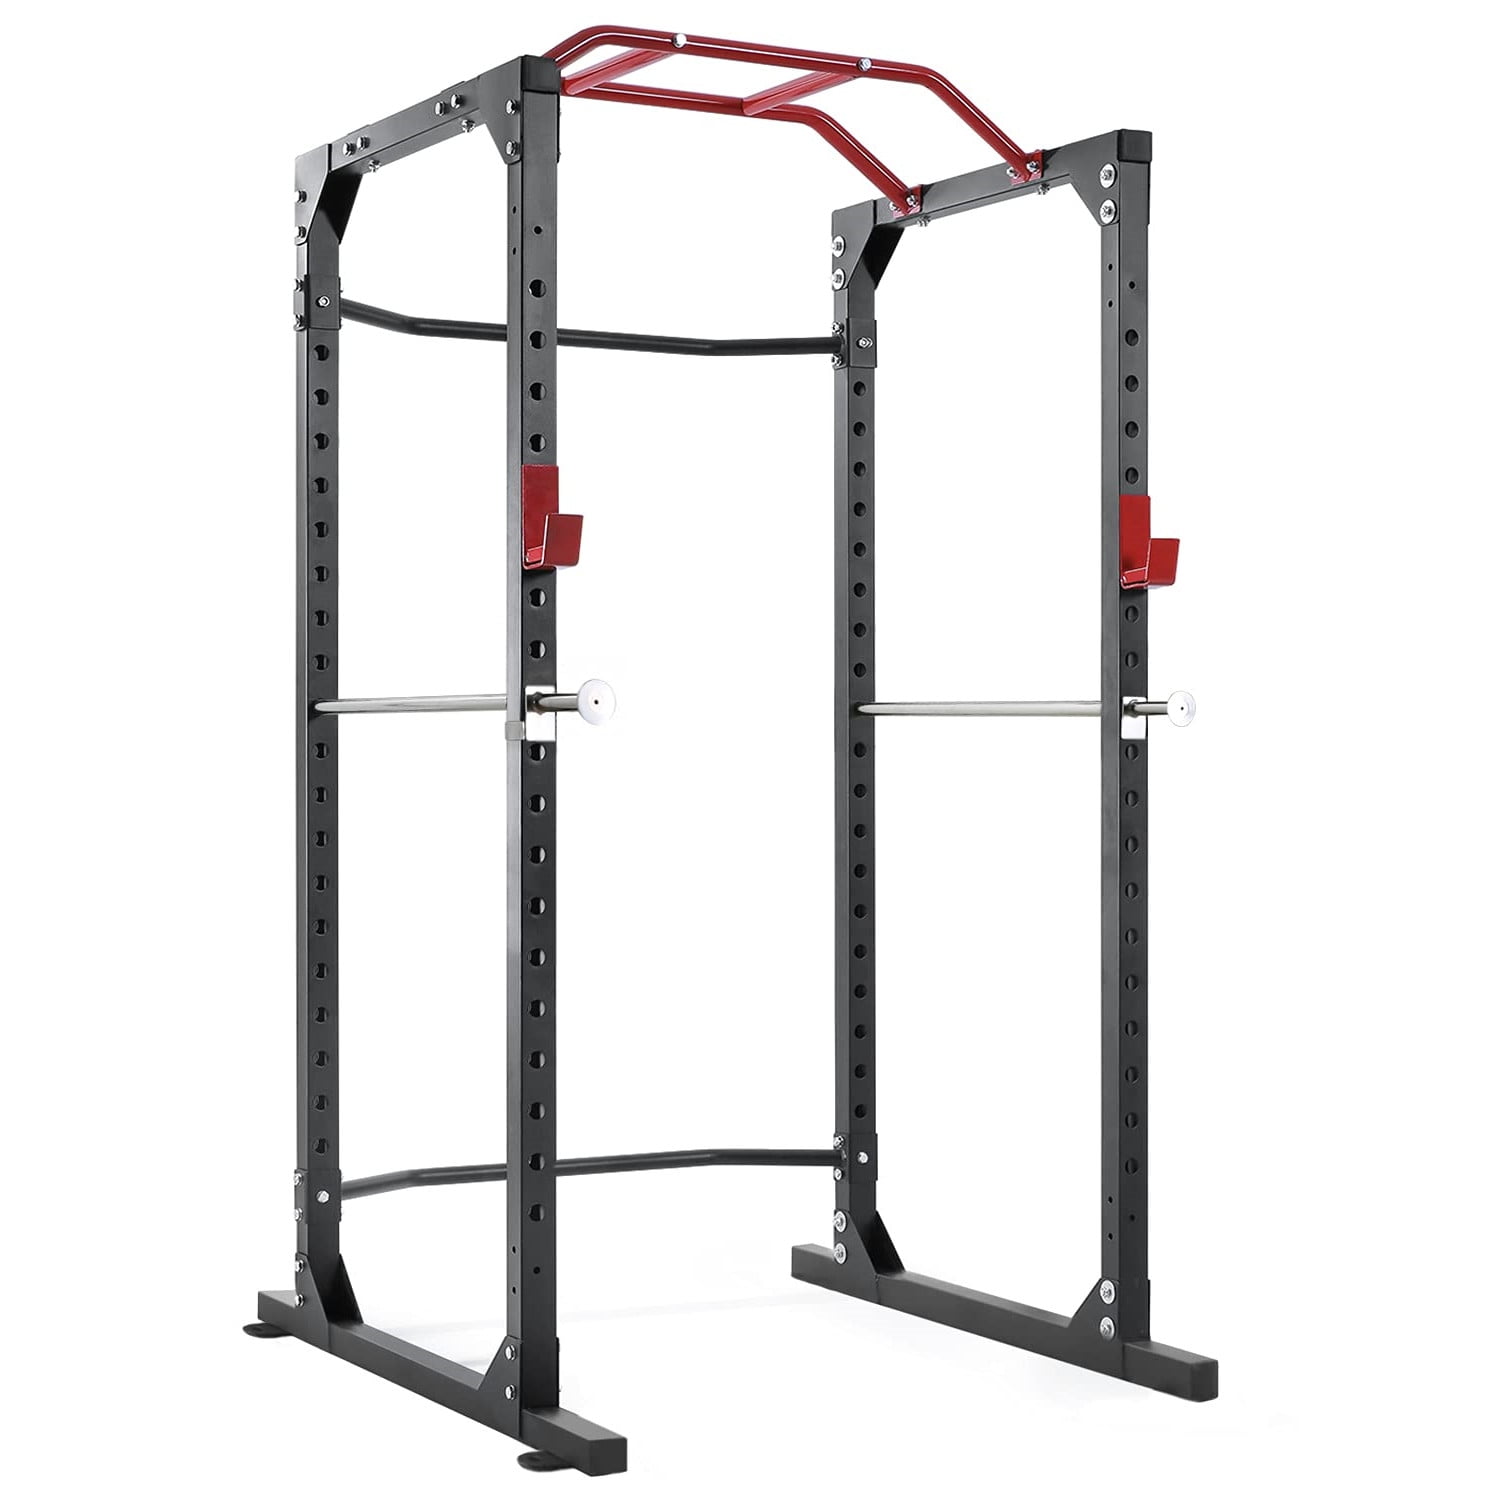 Details about   Adjustable Barbell Rack Weight Lifting Bench Press Squat Rack Pull Up Bar Gym 